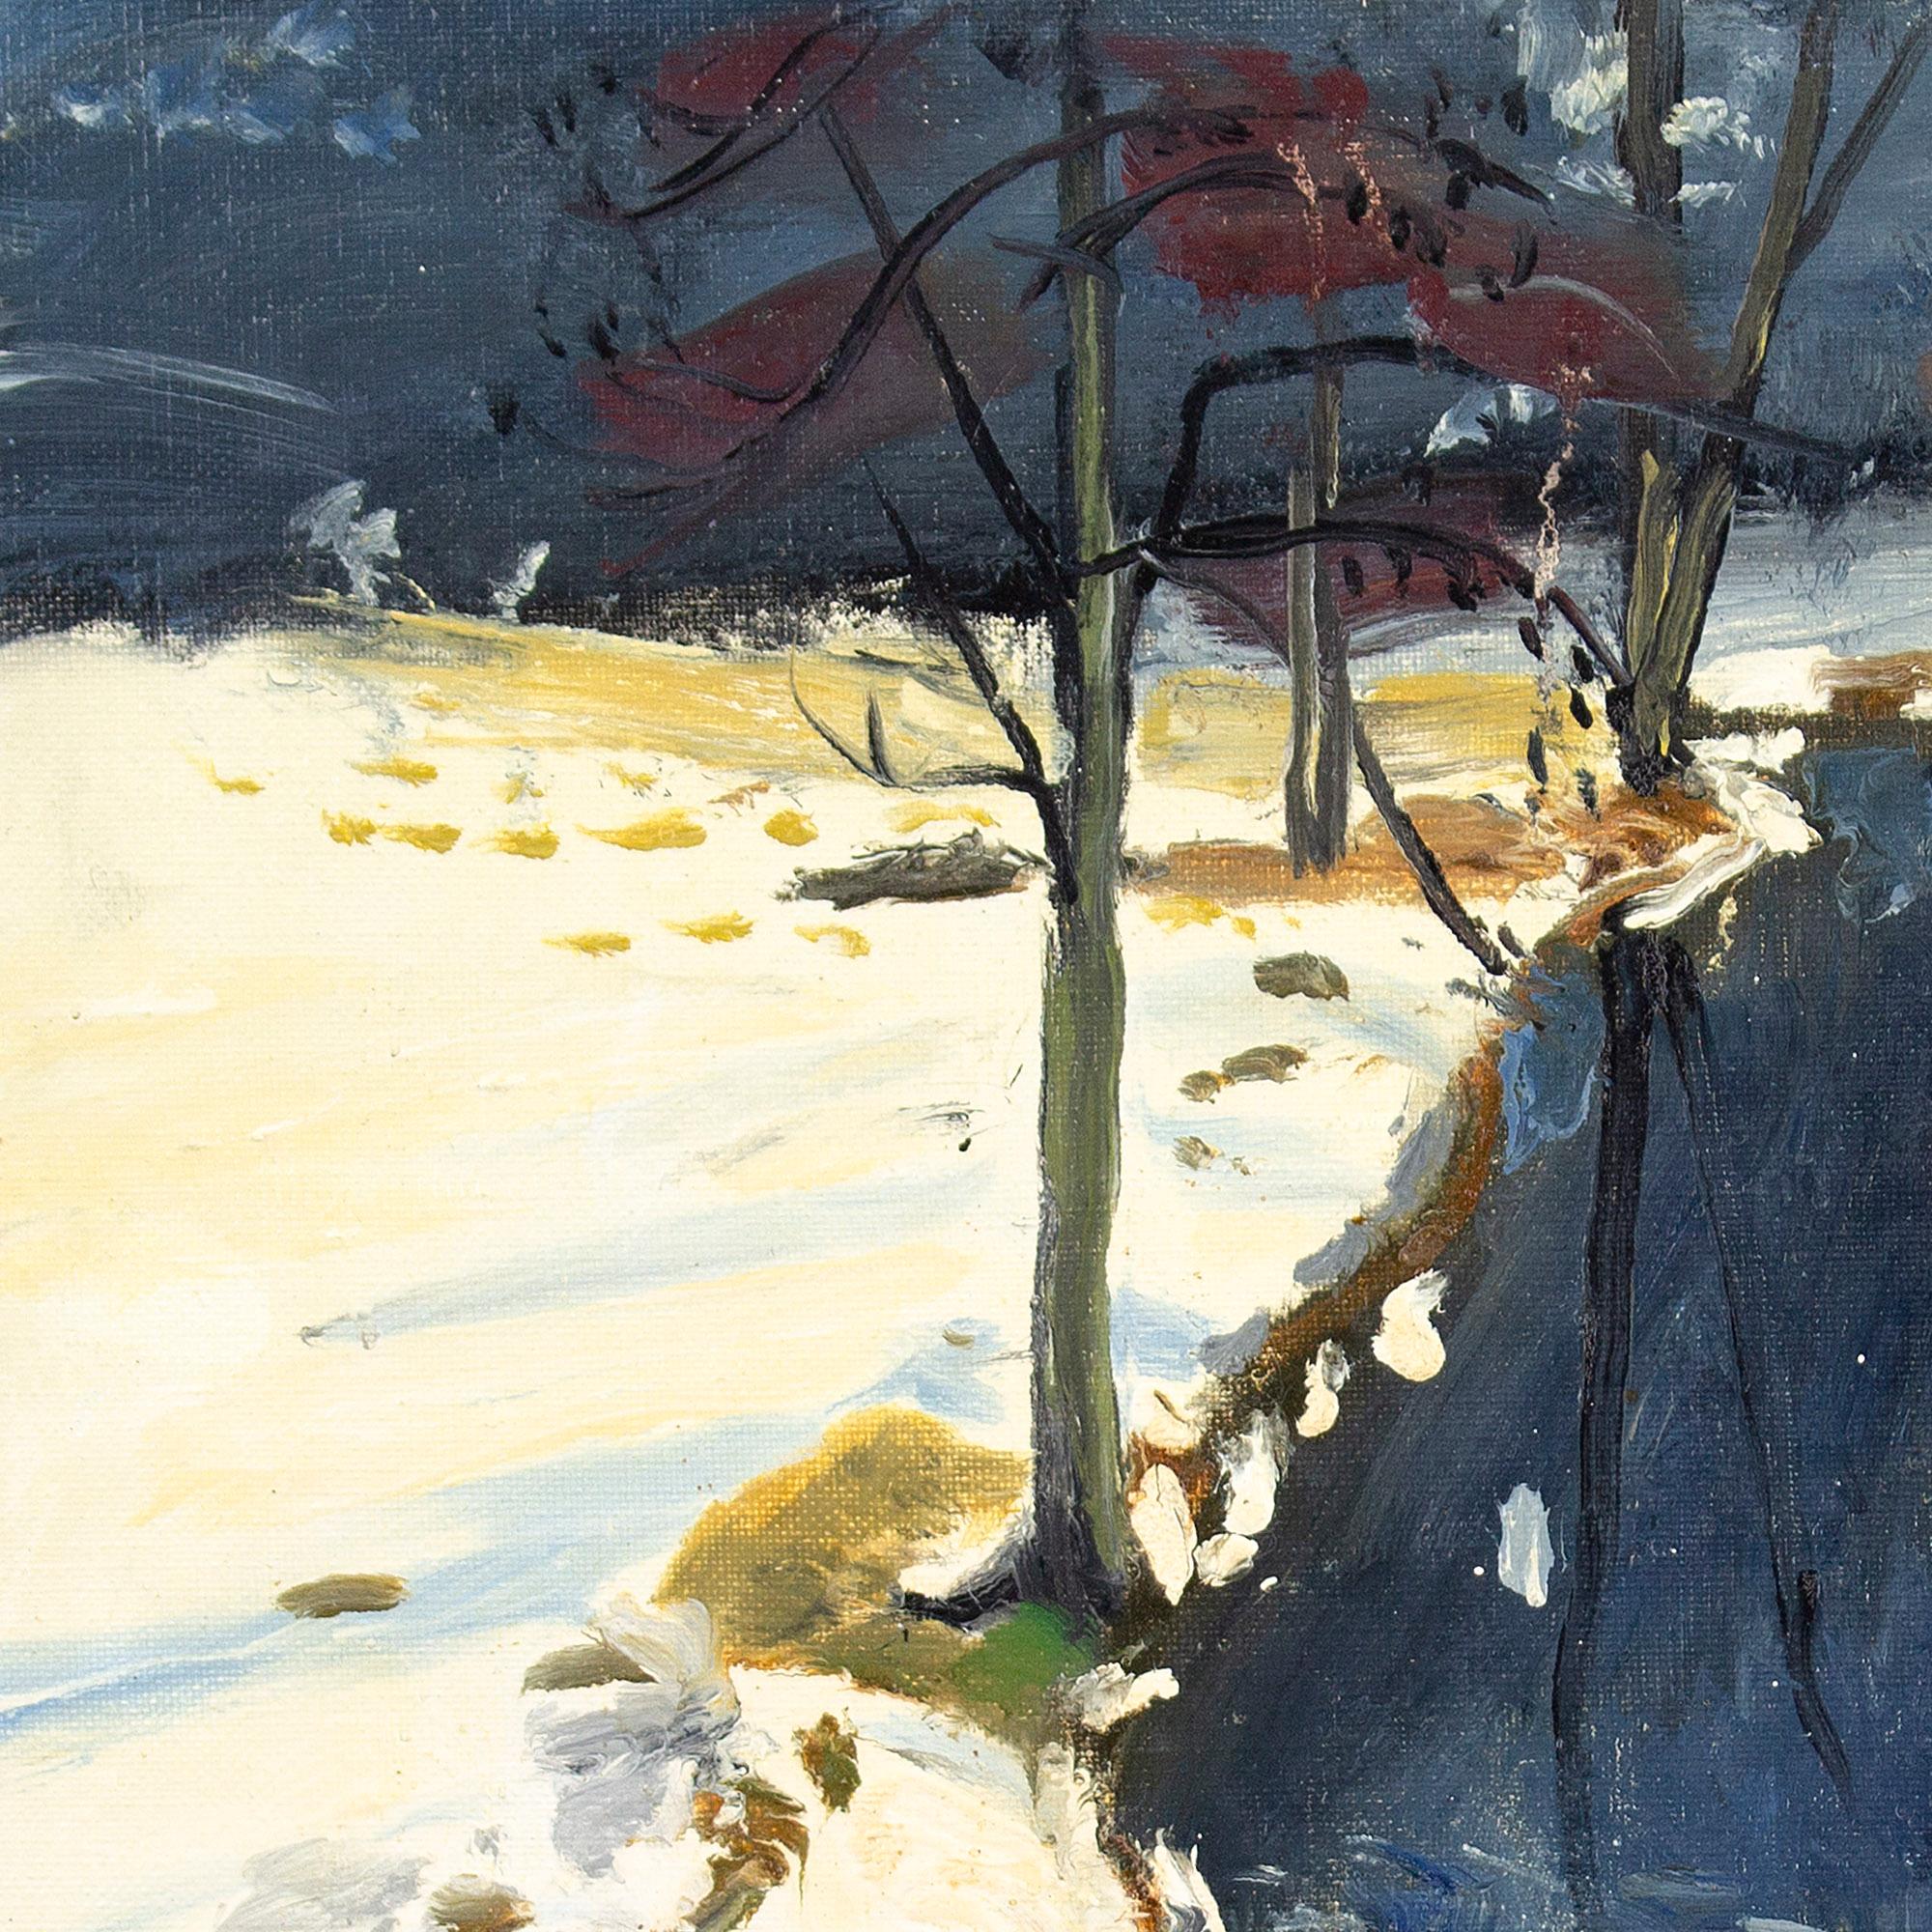 Gunnar Skanby, Snow-Covered Landscape With River, Vintage Oil Painting For Sale 4